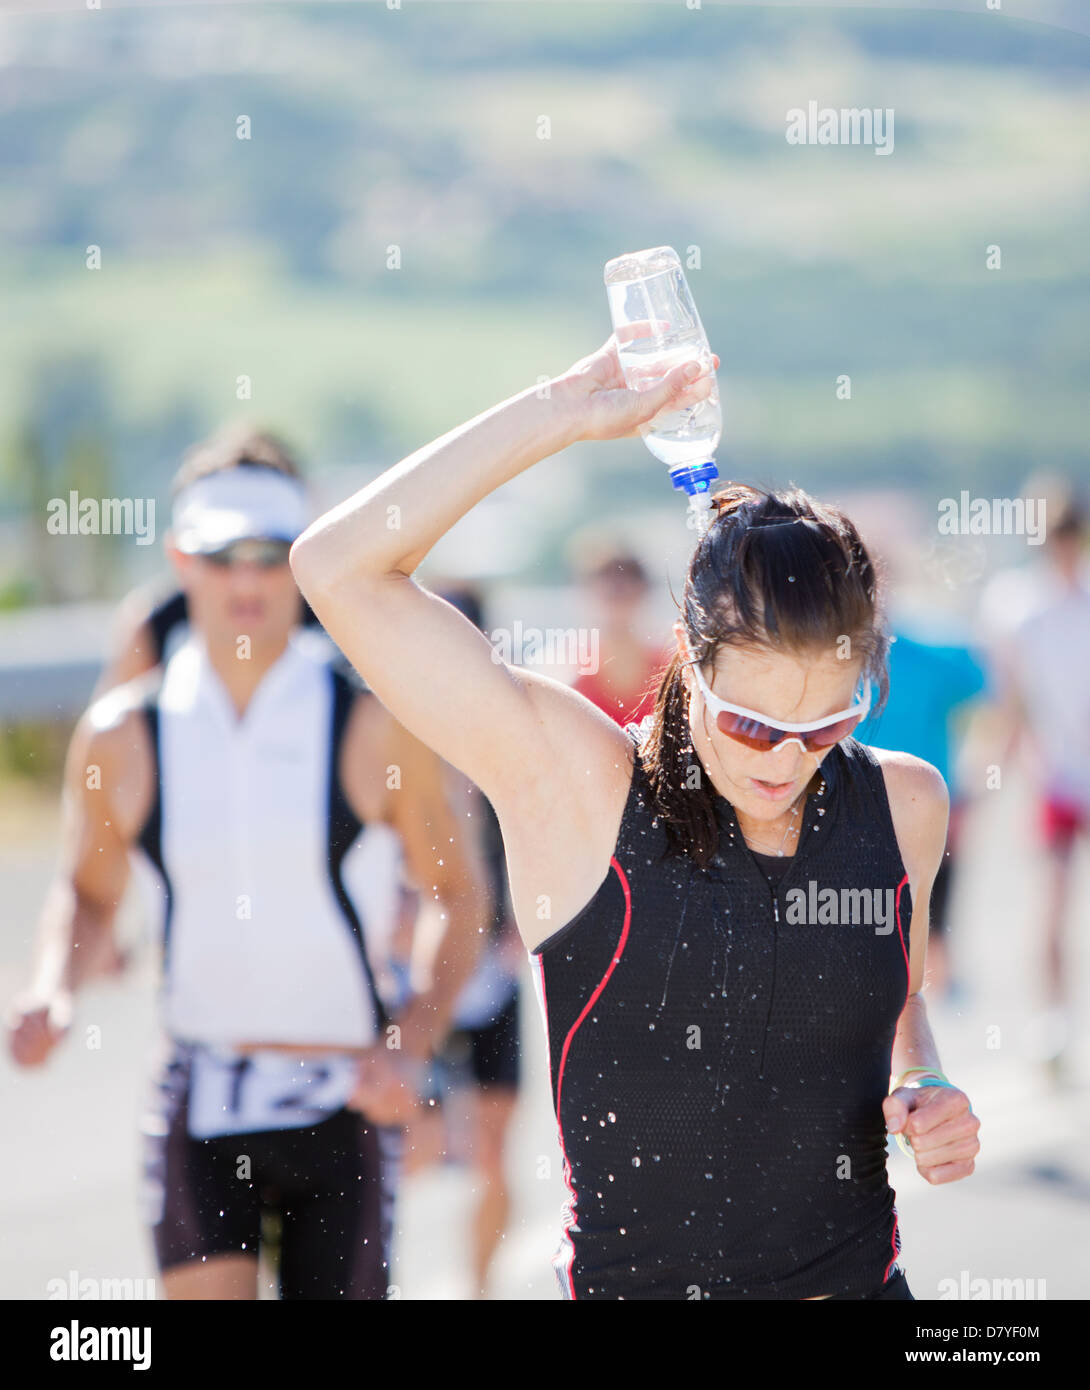 Runner pouring water on head in race Stock Photo